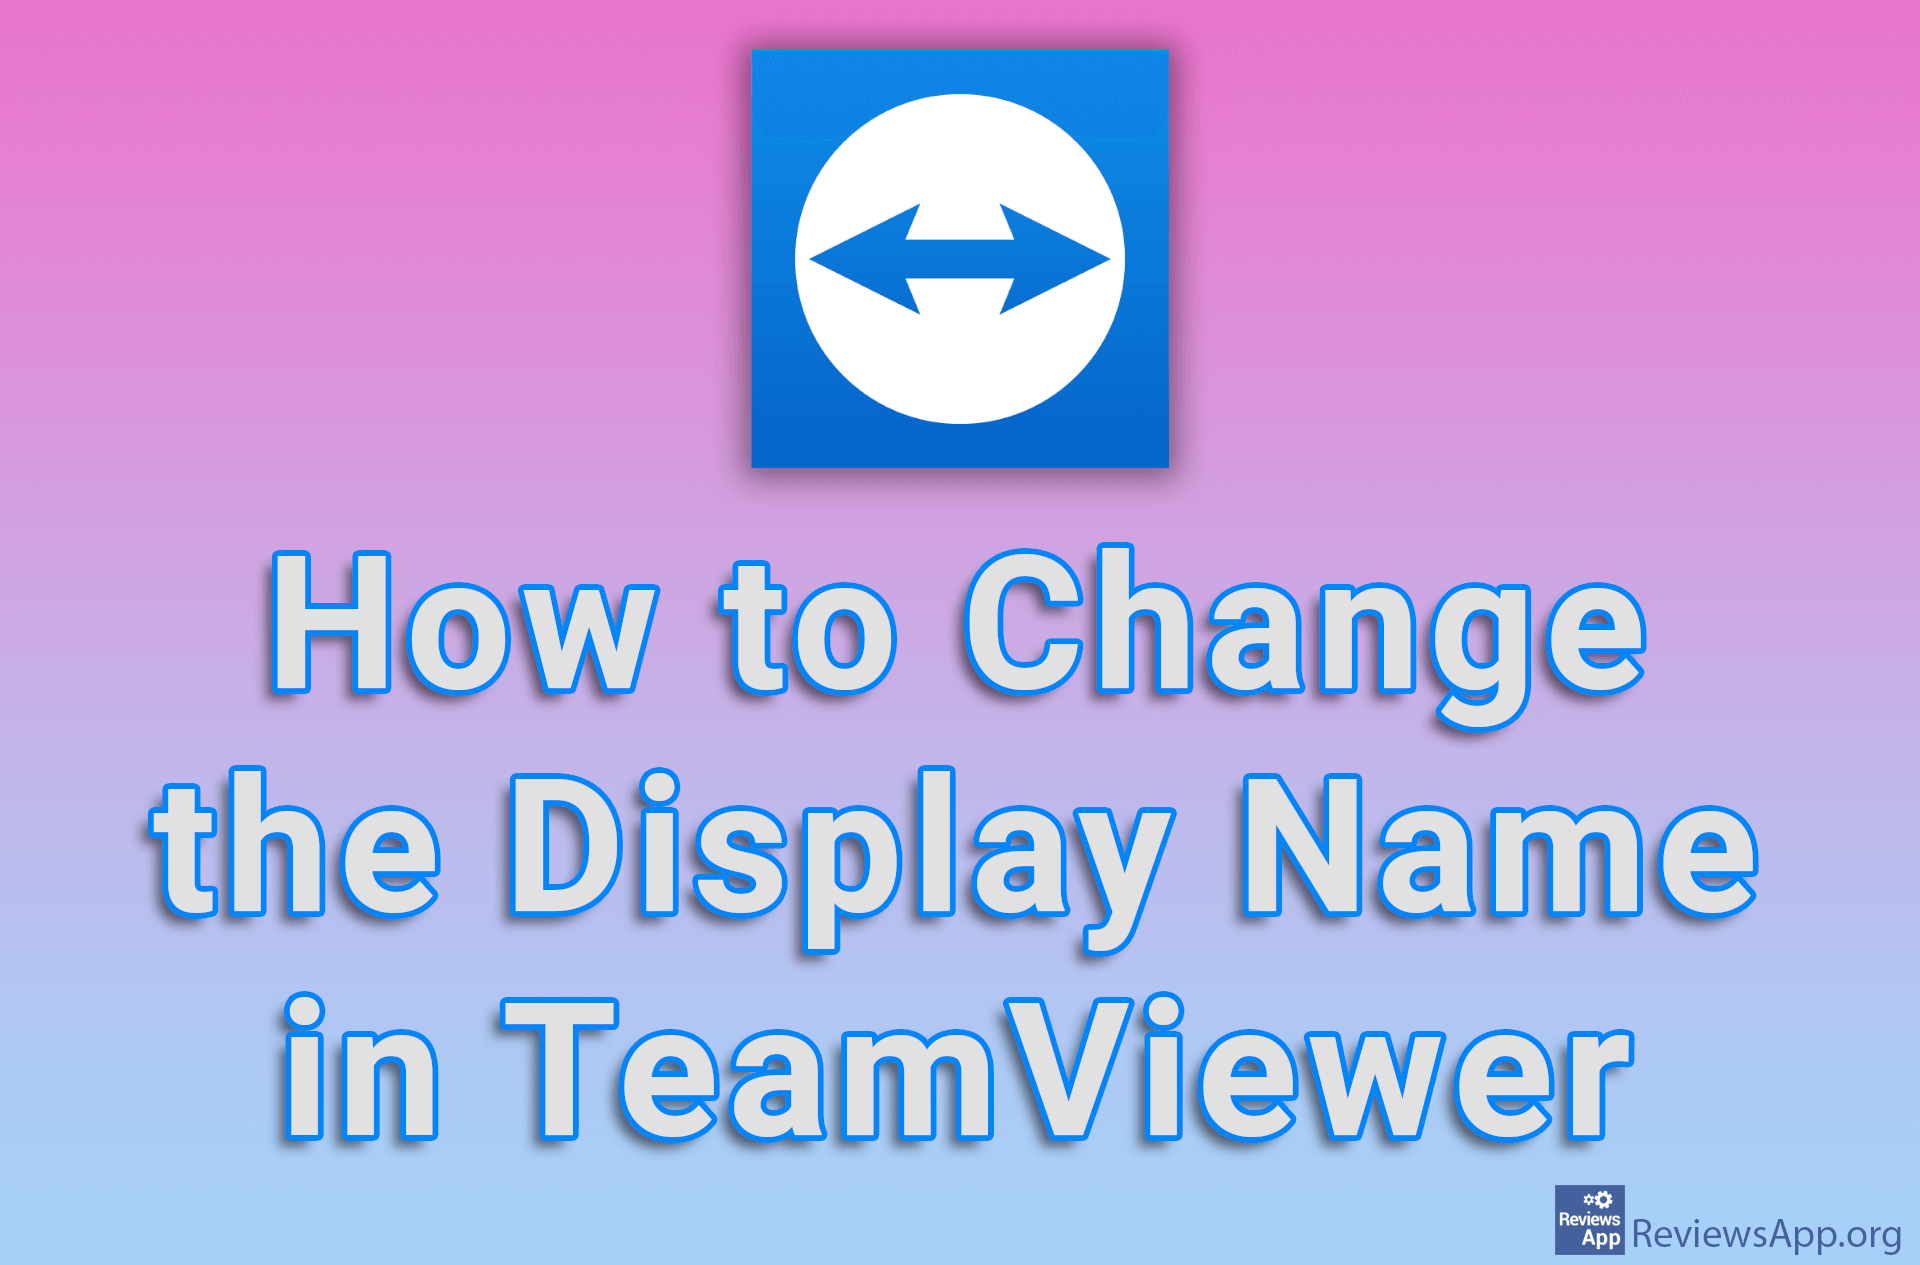 How to Change the Display Name in TeamViewer